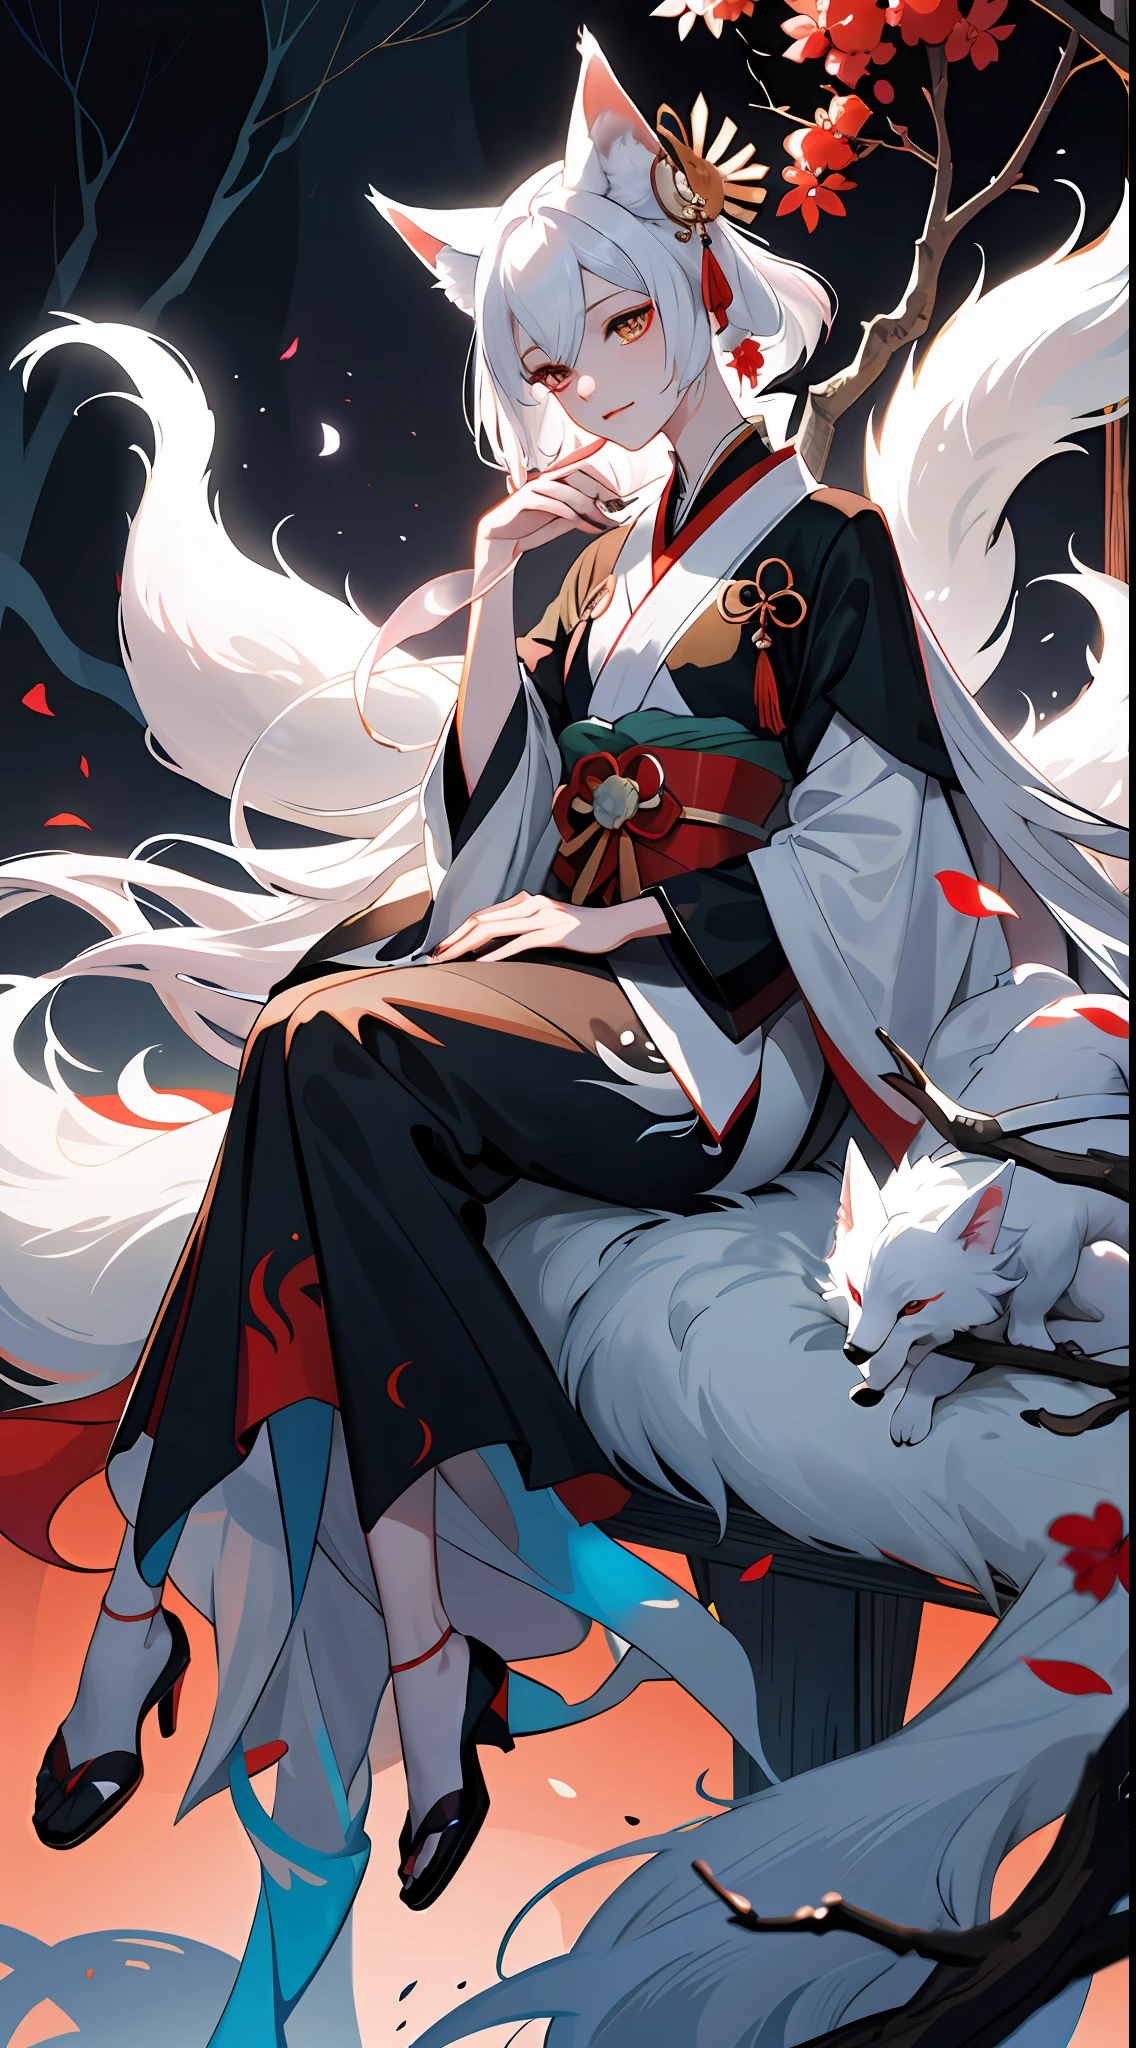 Drawing of a fox with white hair sitting on a branch, ethereal fox, nine-tailed fox, fox three-tailed fox, onmyoji detailed art, nine-tailed, beautiful artwork illustration, mythological creature, fox, beautiful Digital artwork, exquisite digital illustrations, mizutsune, inspired by mythical creatures Wildnet, digital art on pixiv, strong light, high contrast, horror movie theme, dark atmosphere